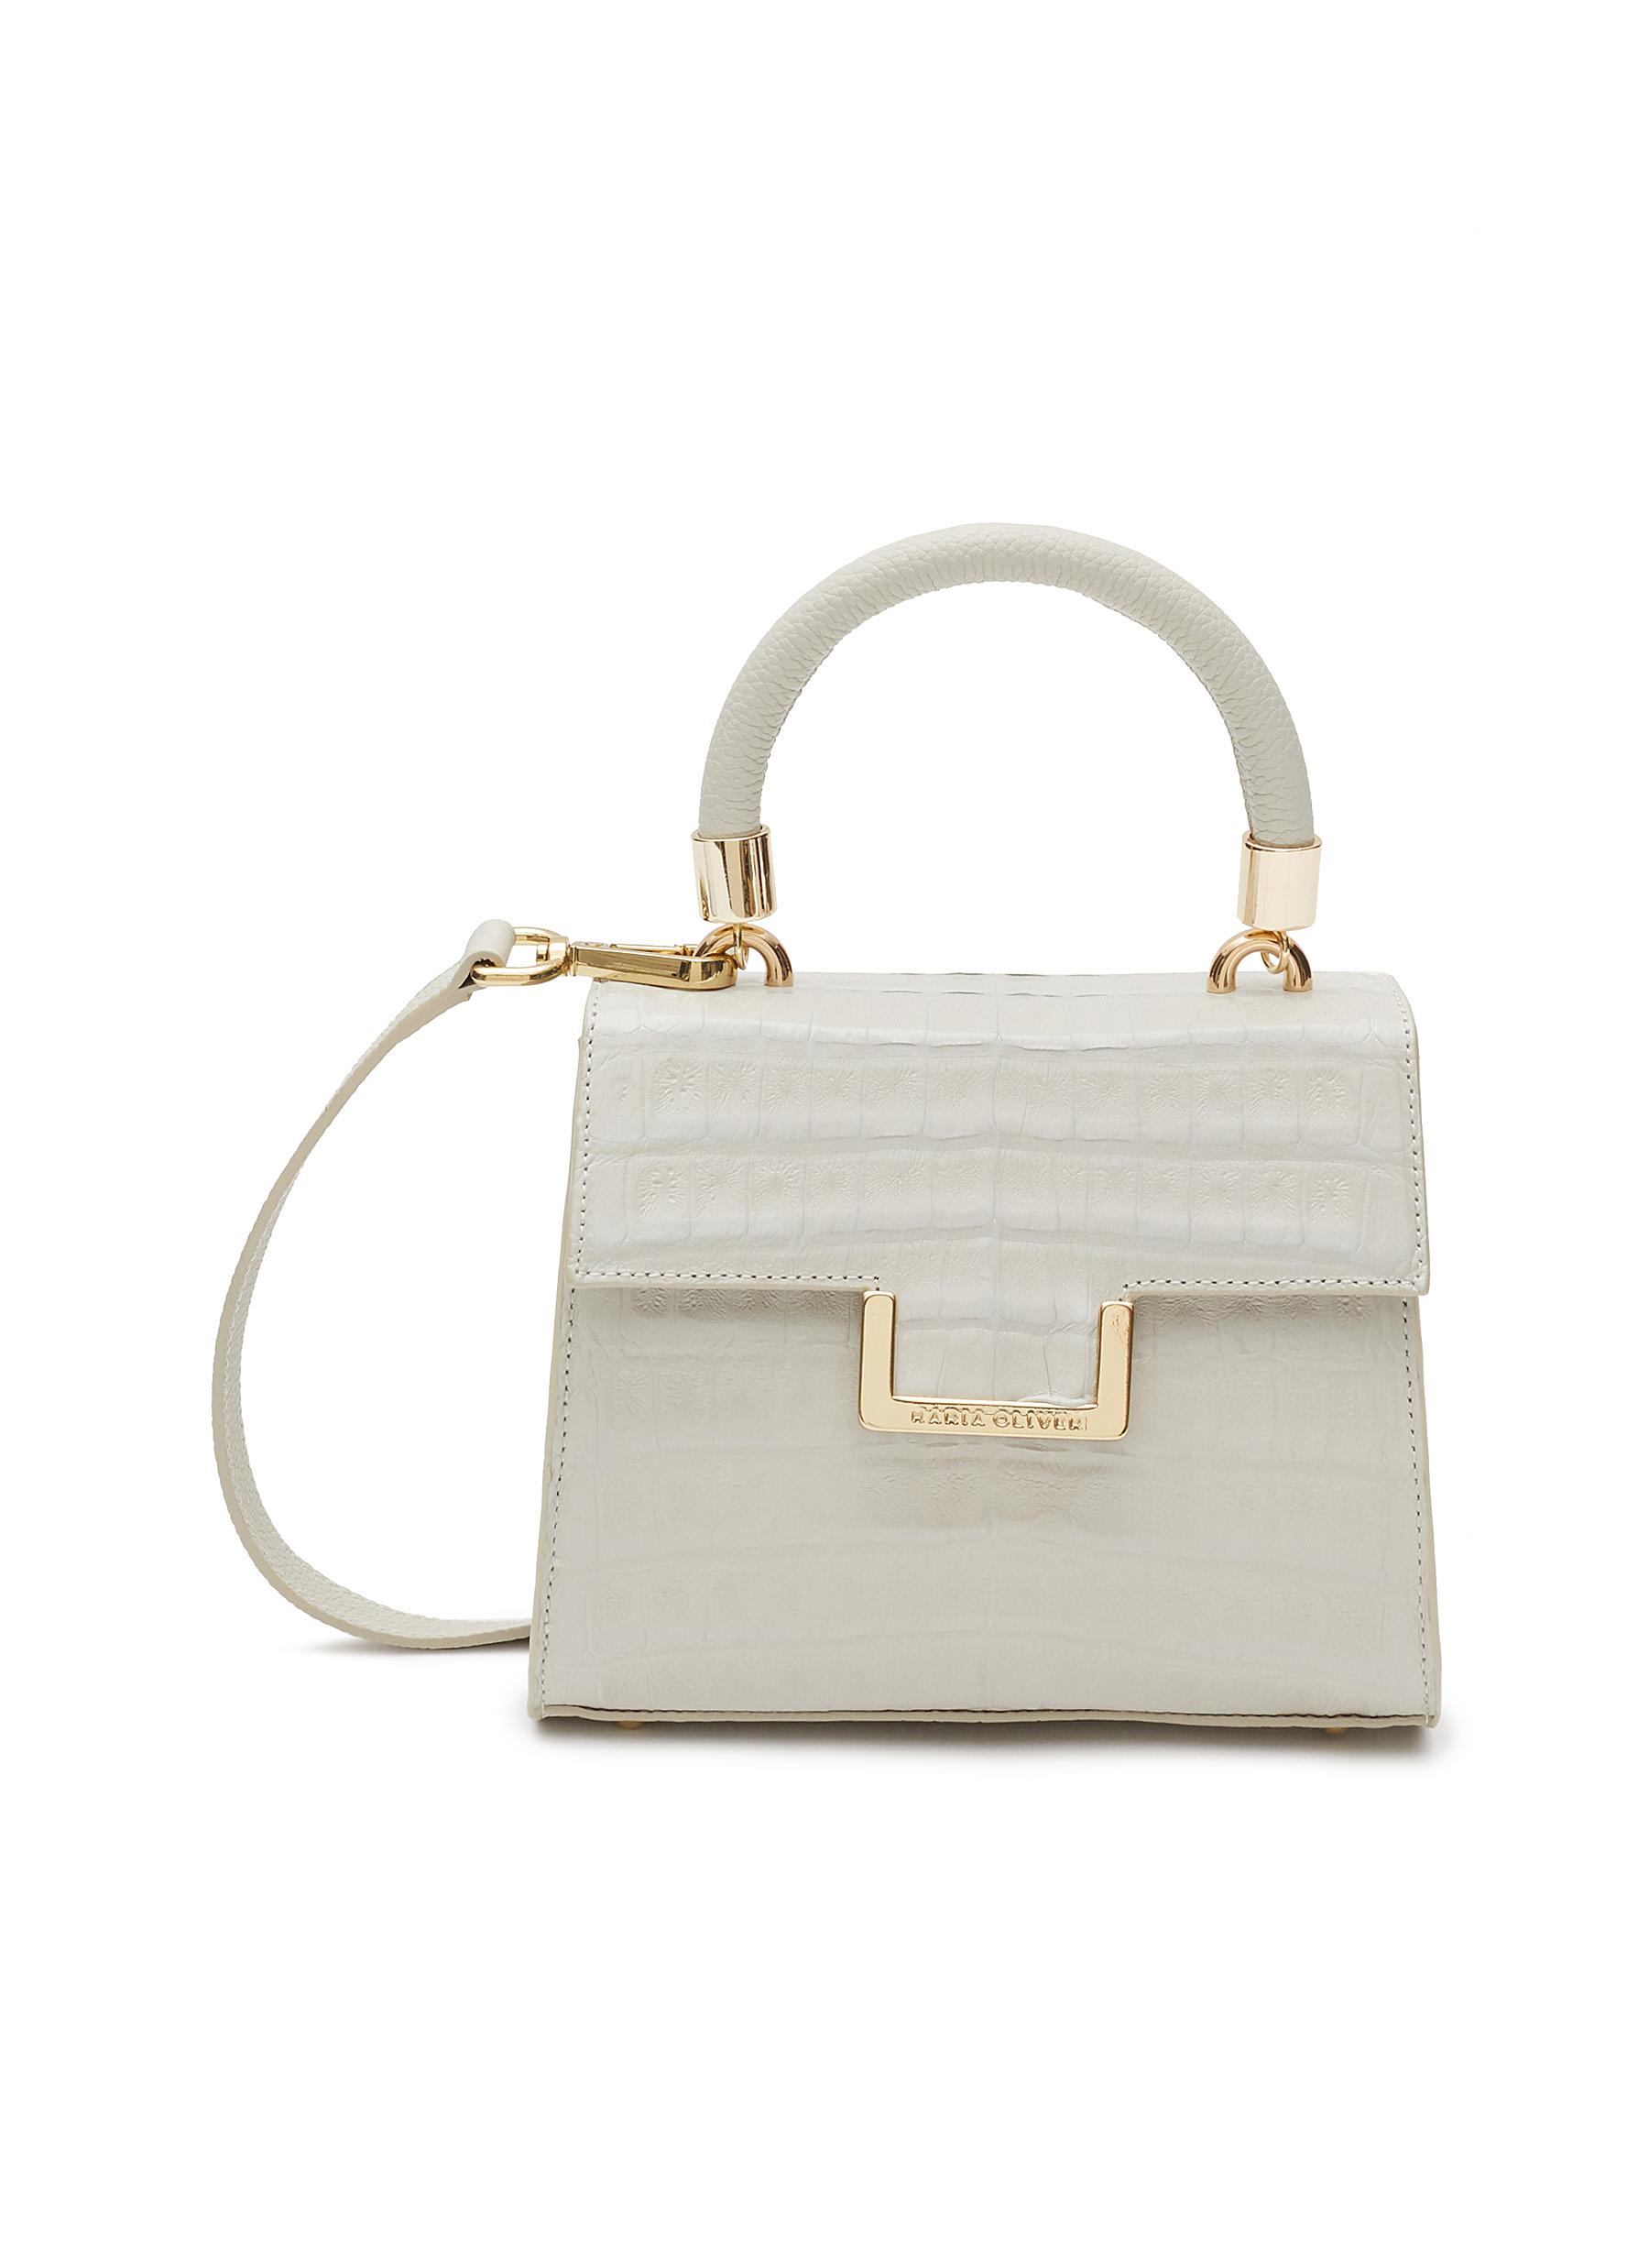 Maria Oliver Mini 'michelle' Top Handle Python Leather Bag In Grey